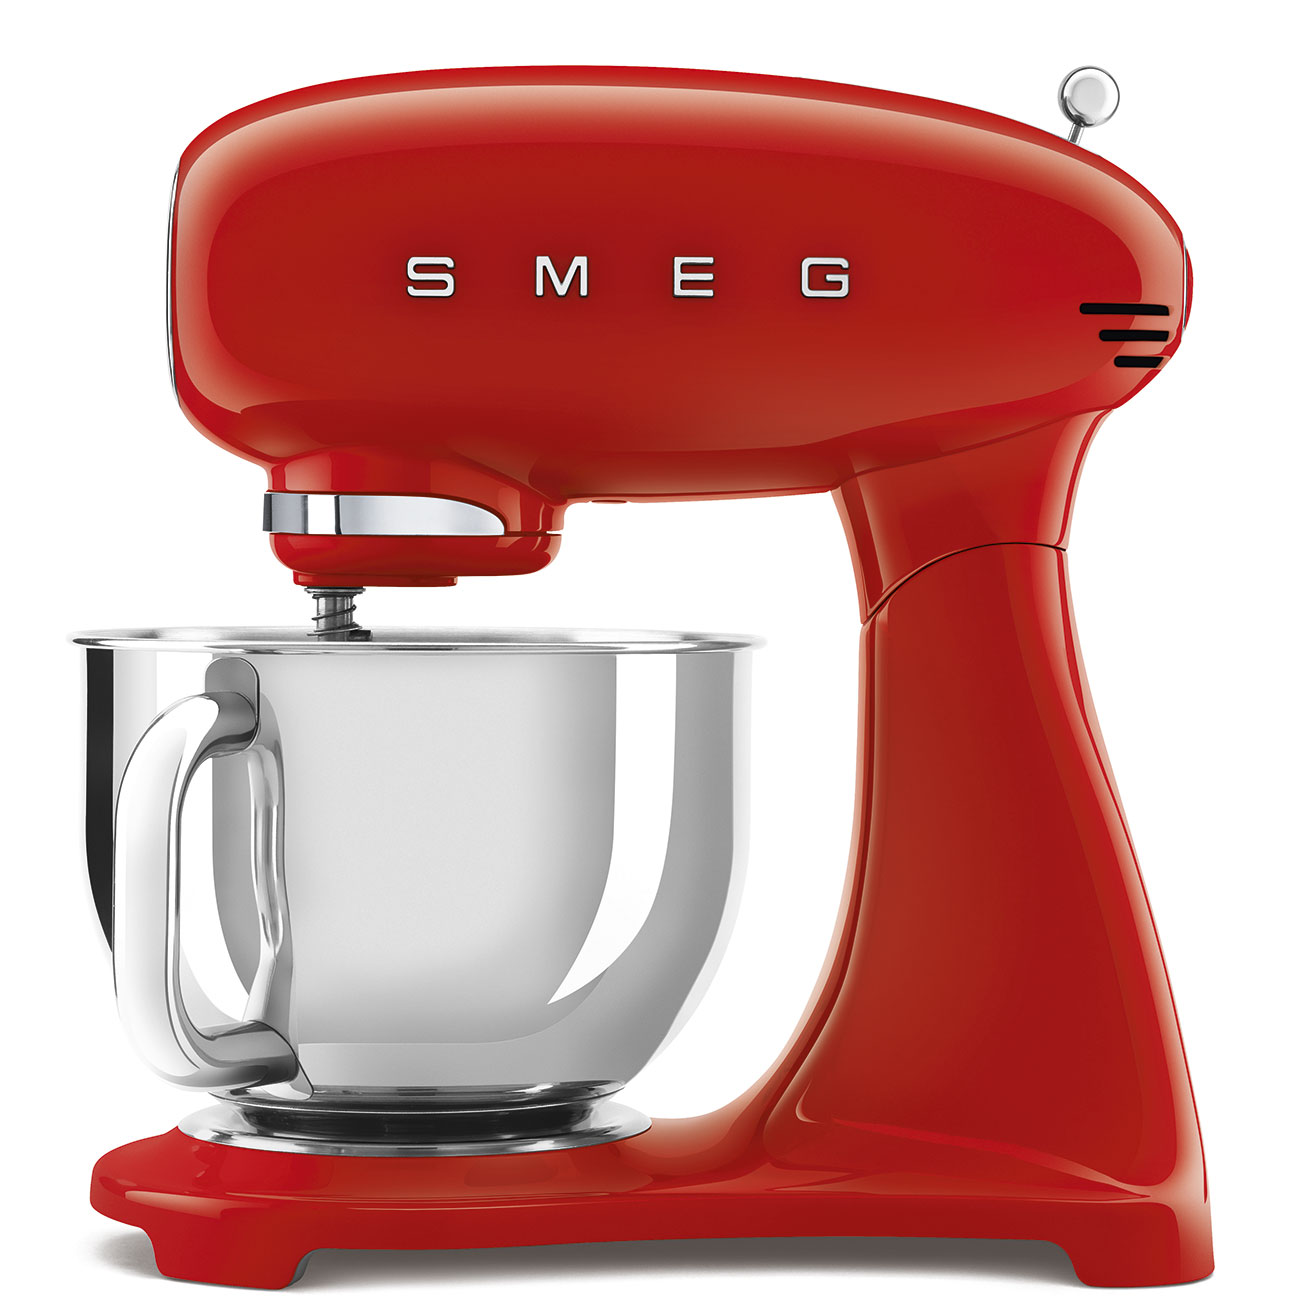 Red Stand mixer full color SMF03RDUK Smeg_1